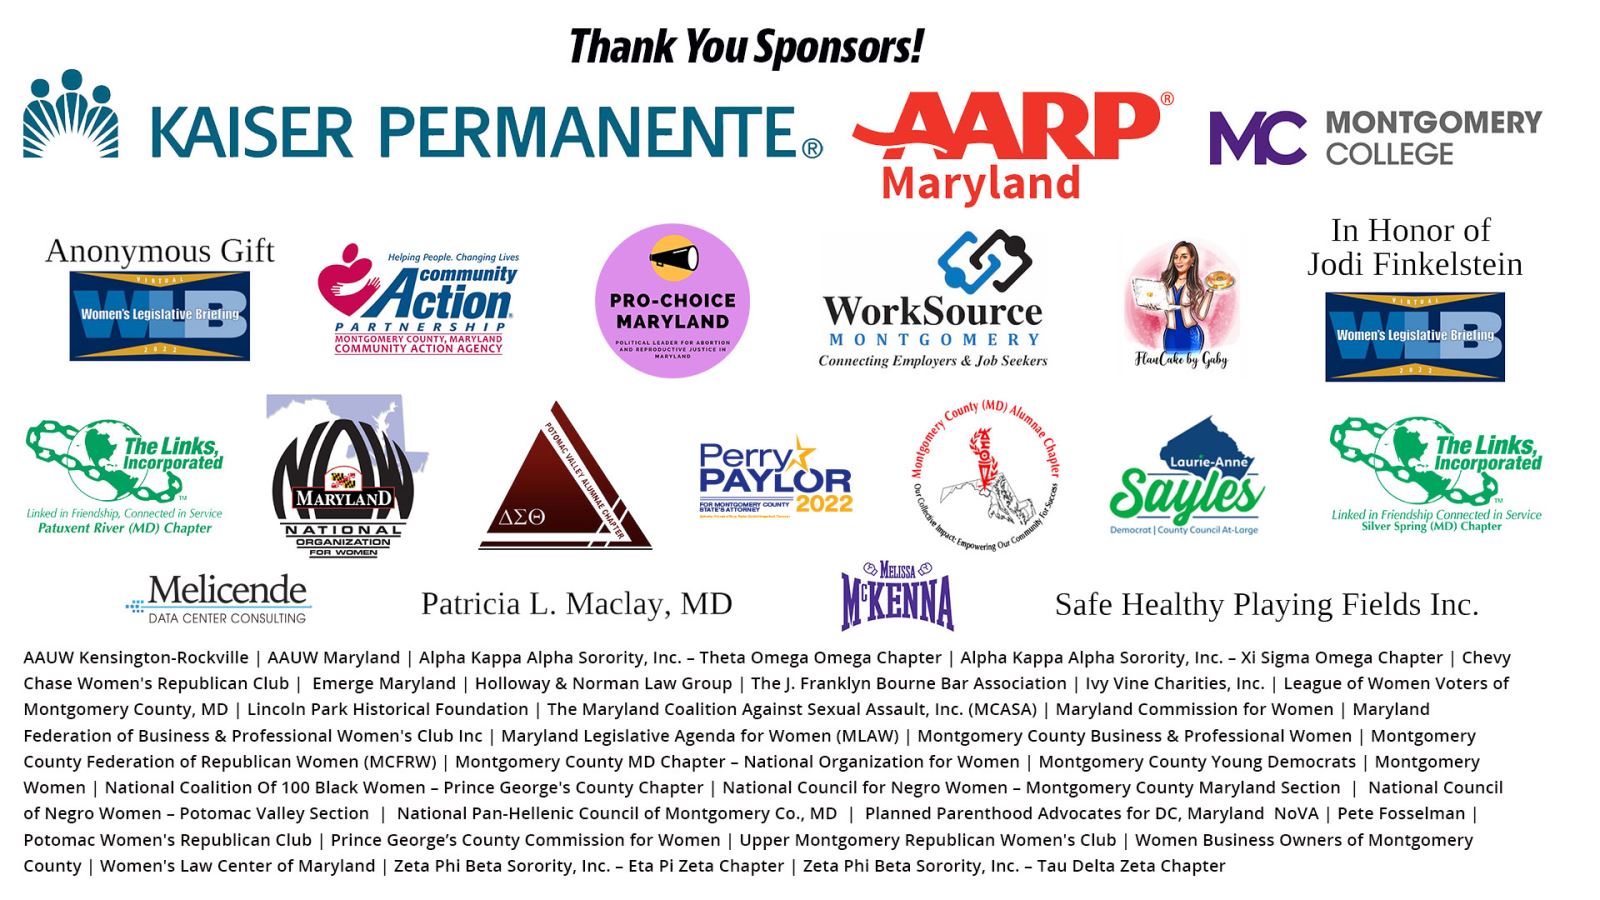 Thank you our Sponsors! Kaiser Permanente, AARP, Montgomery College, Community Action Partnership, Pro Choice Maryland, Worksource Montgomery, Flan cake by Gaby, In Honor of Jodi Finkelstein, The links Inc, Maryland National Organization for women, Patricia l. Mc calay MD, Perry Taylor, Montgomery County Alumni chapter, Lourie Anne Sayles, Melicende Data Center Consulting, Melissa McKenna, Safe Healthy Playing Fields Inc.